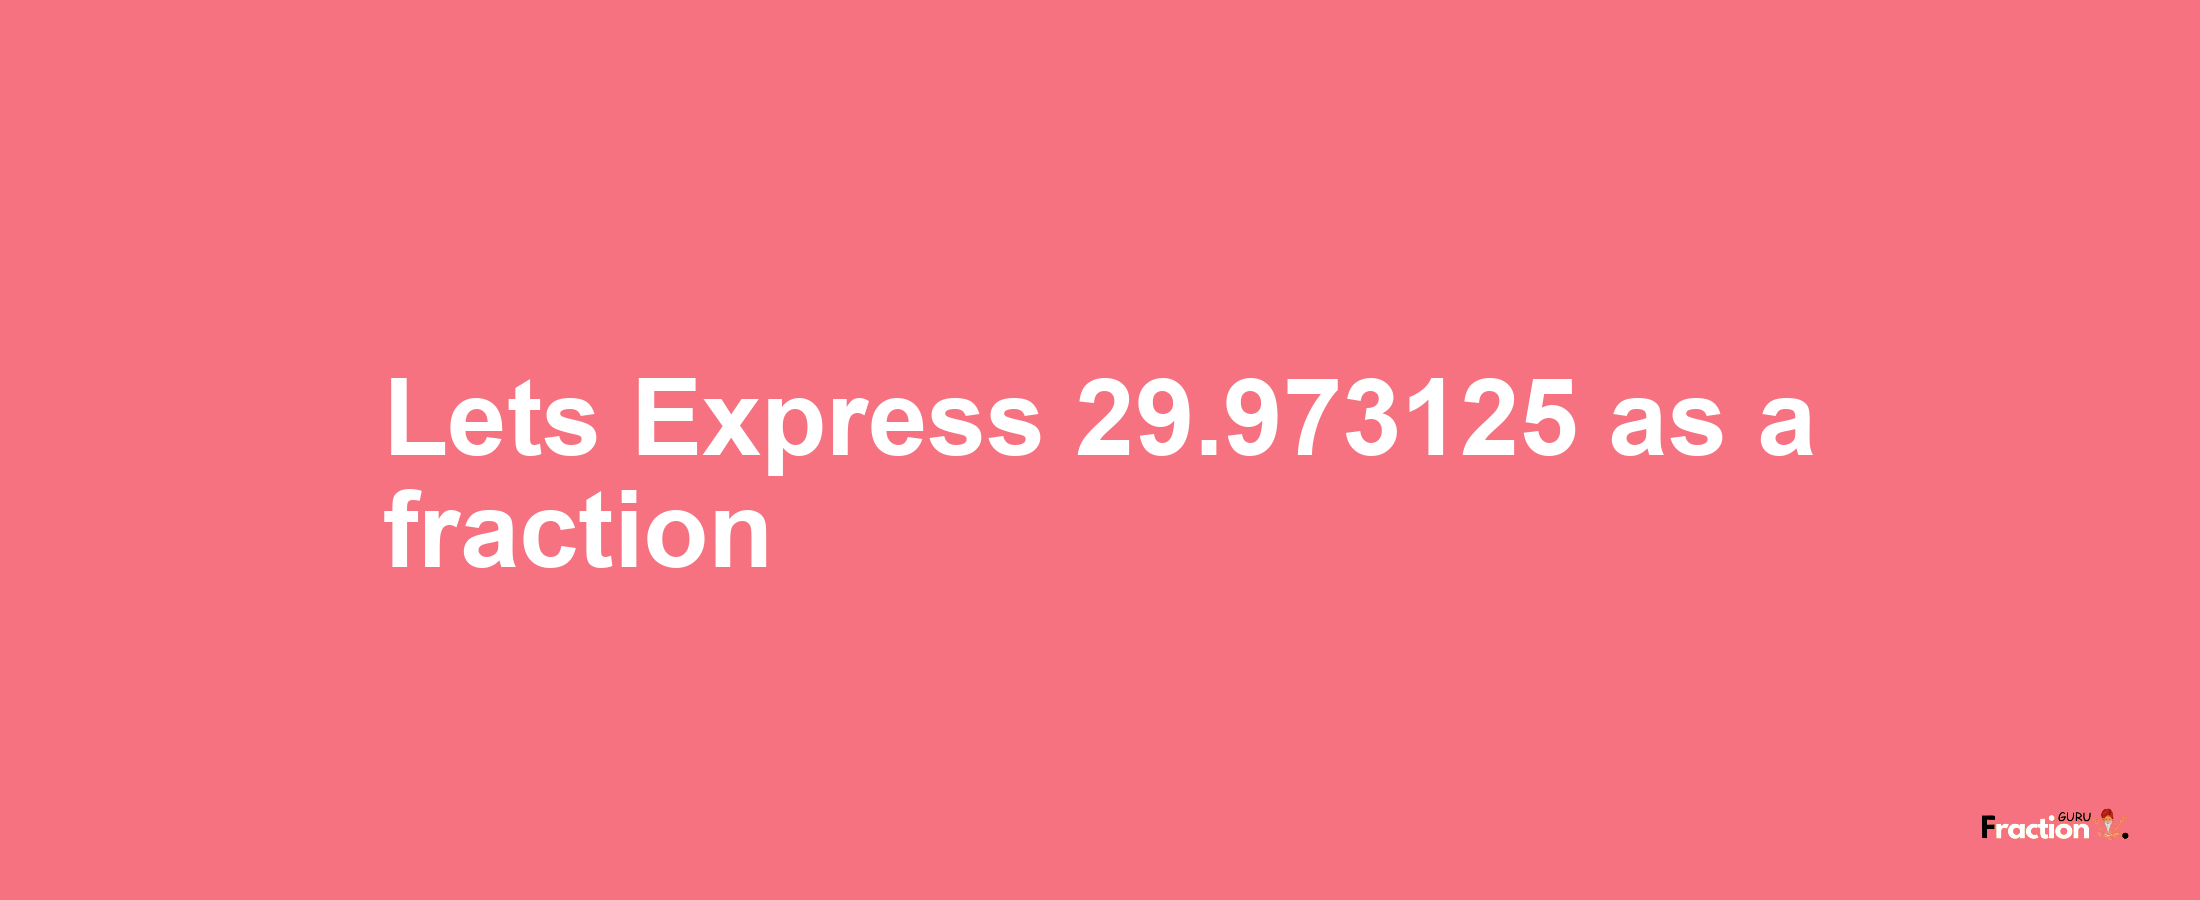 Lets Express 29.973125 as afraction